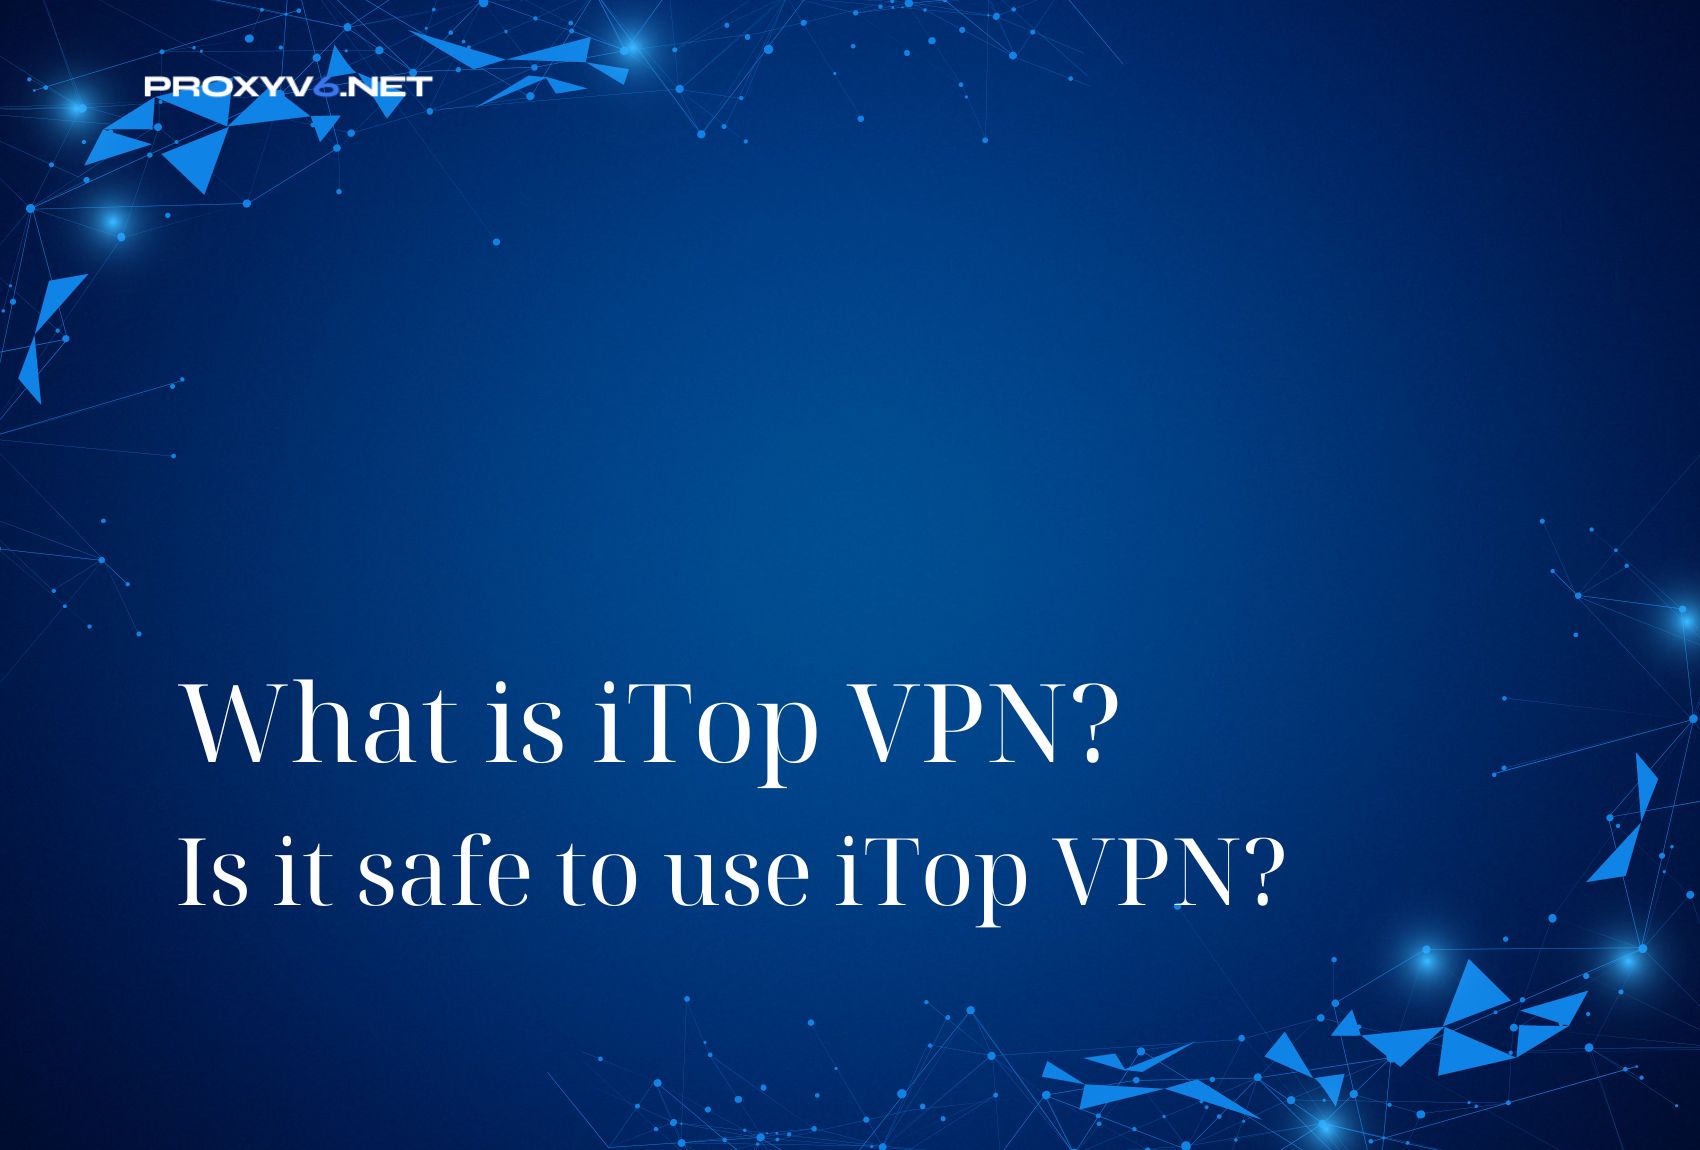 Is it safe to use iTop?